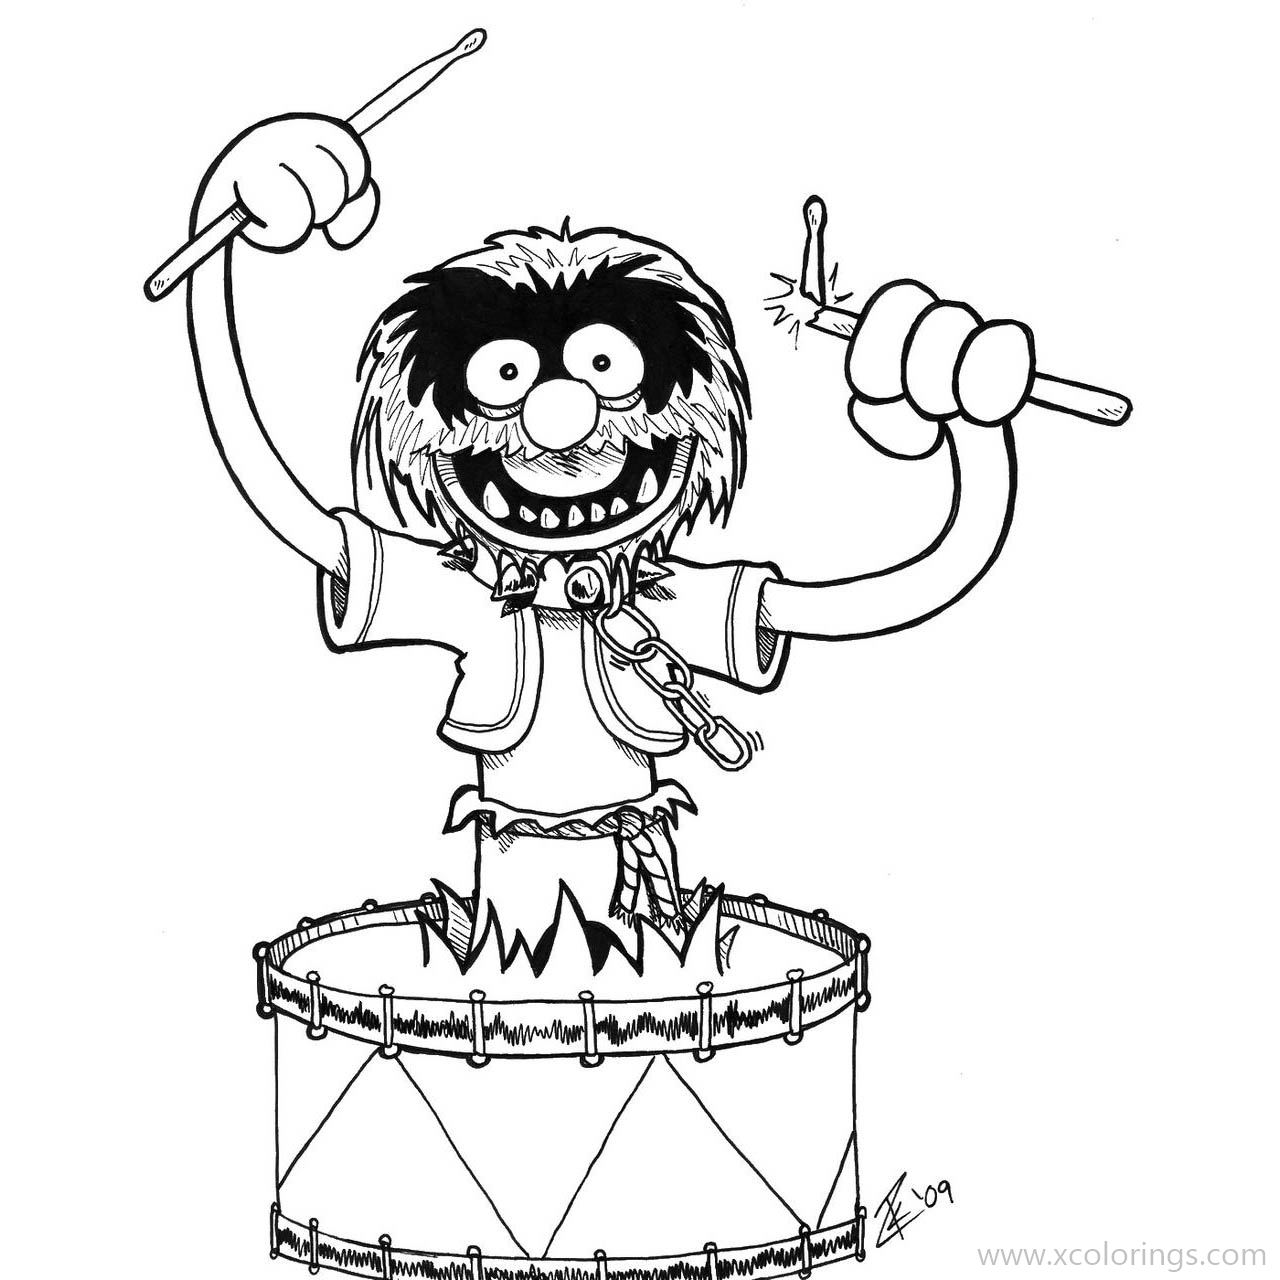 Free The Muppets Coloring Pages Animal is Playing Drum printable